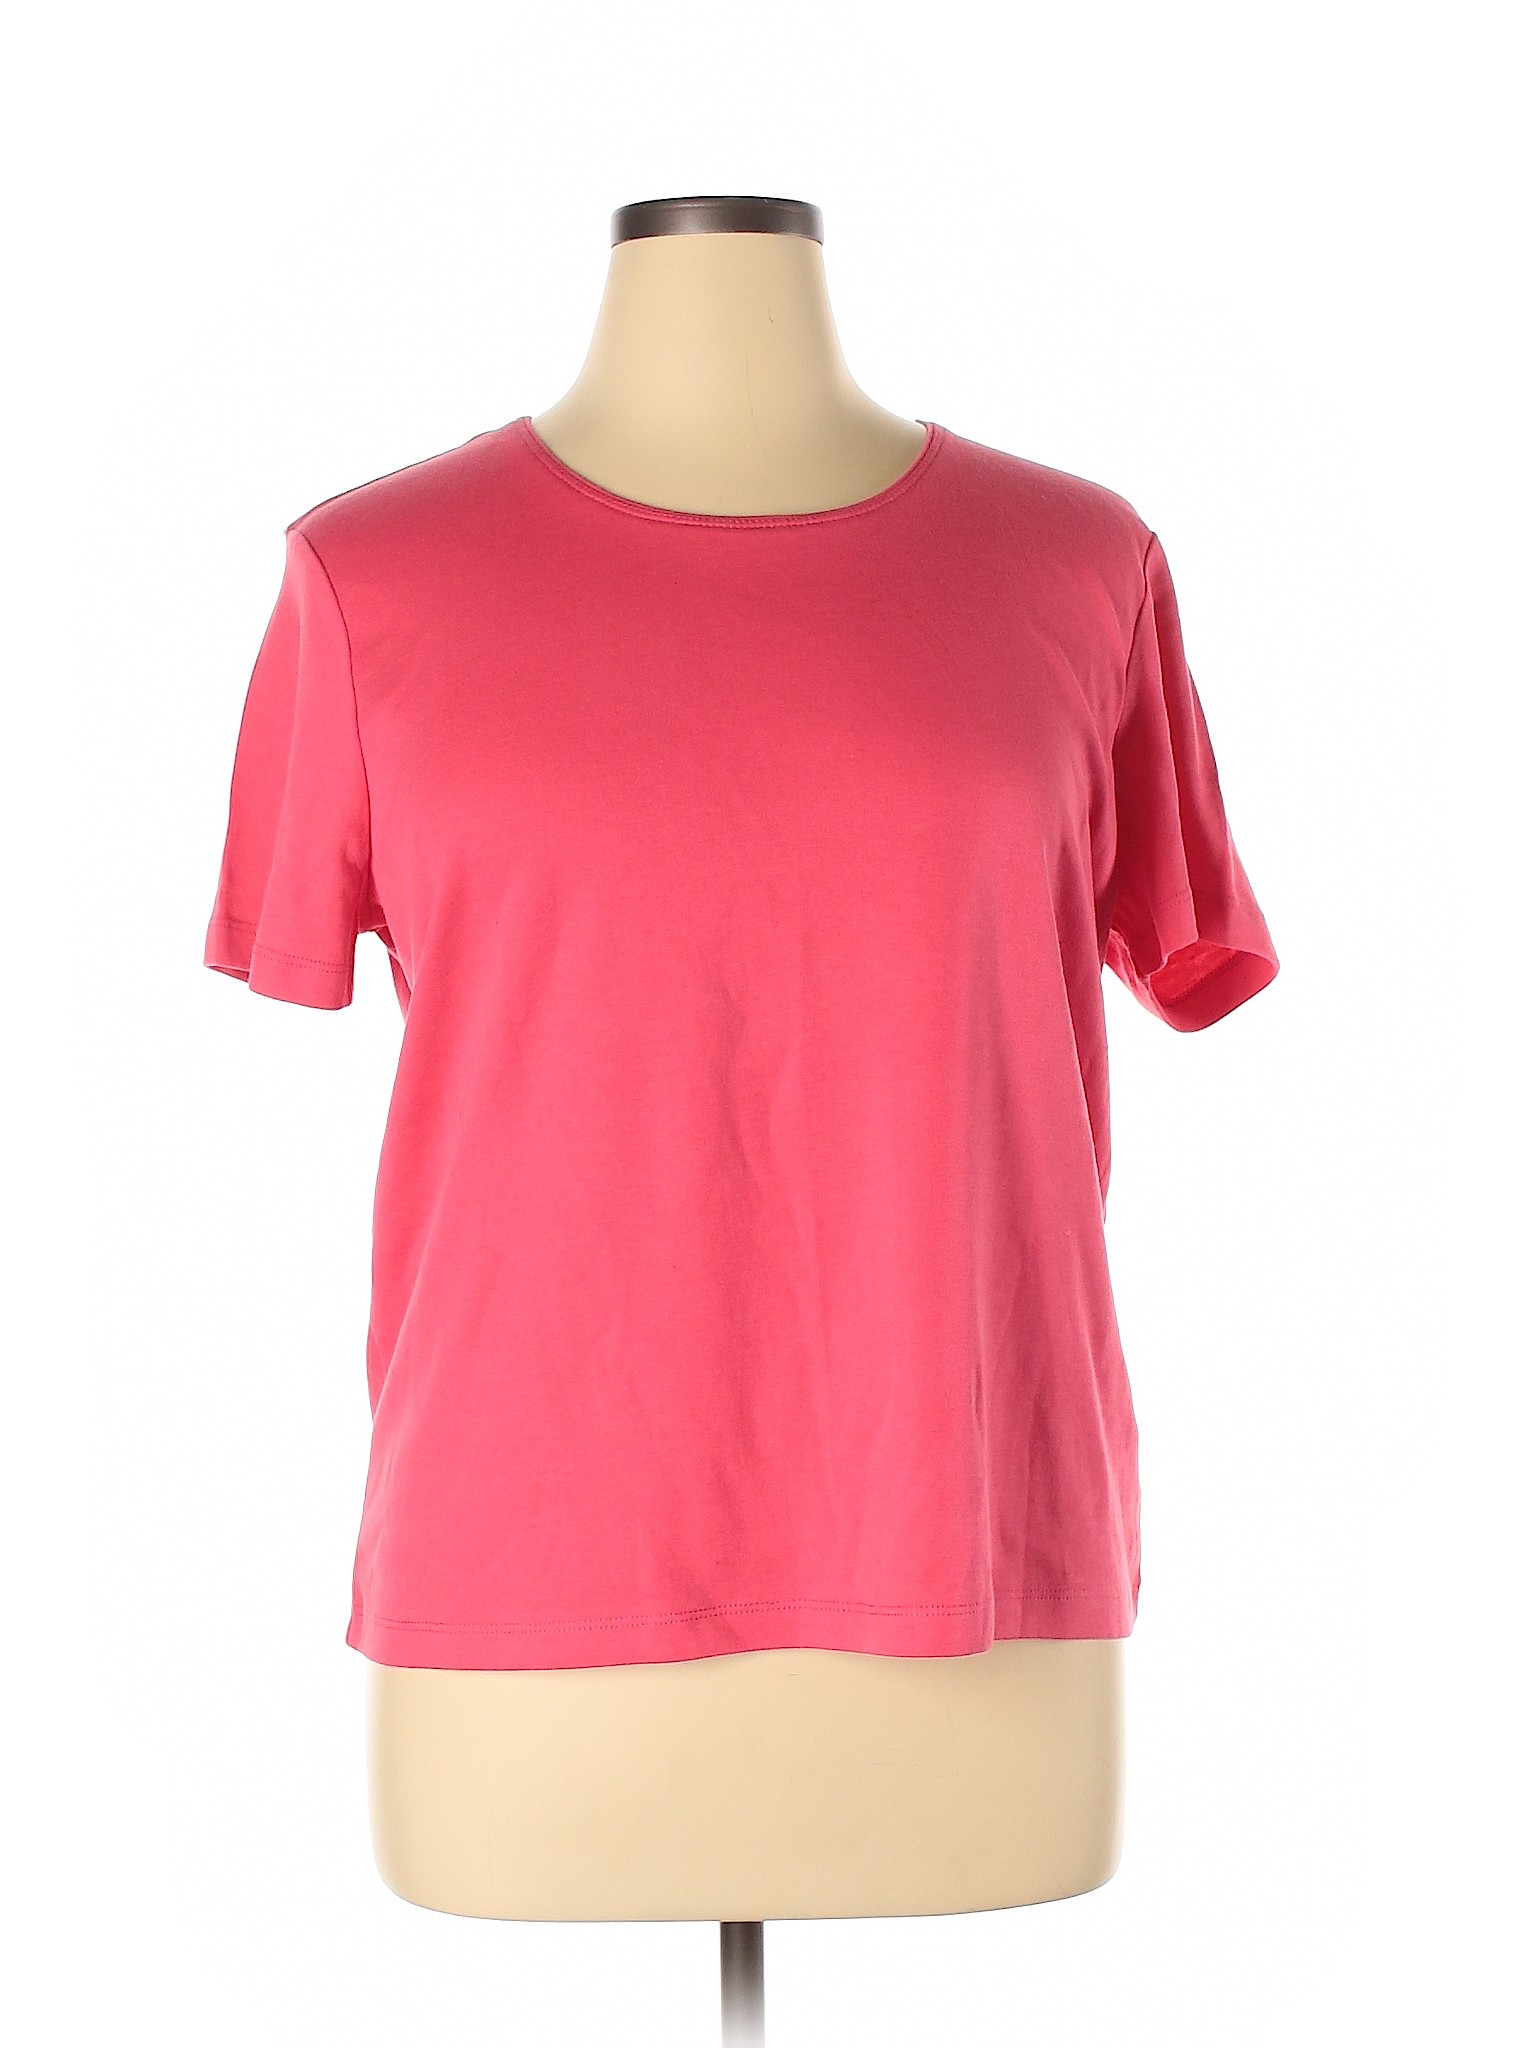 Rebecca Malone Solid Pink Short Sleeve T-Shirt Size XL - 41% off | thredUP